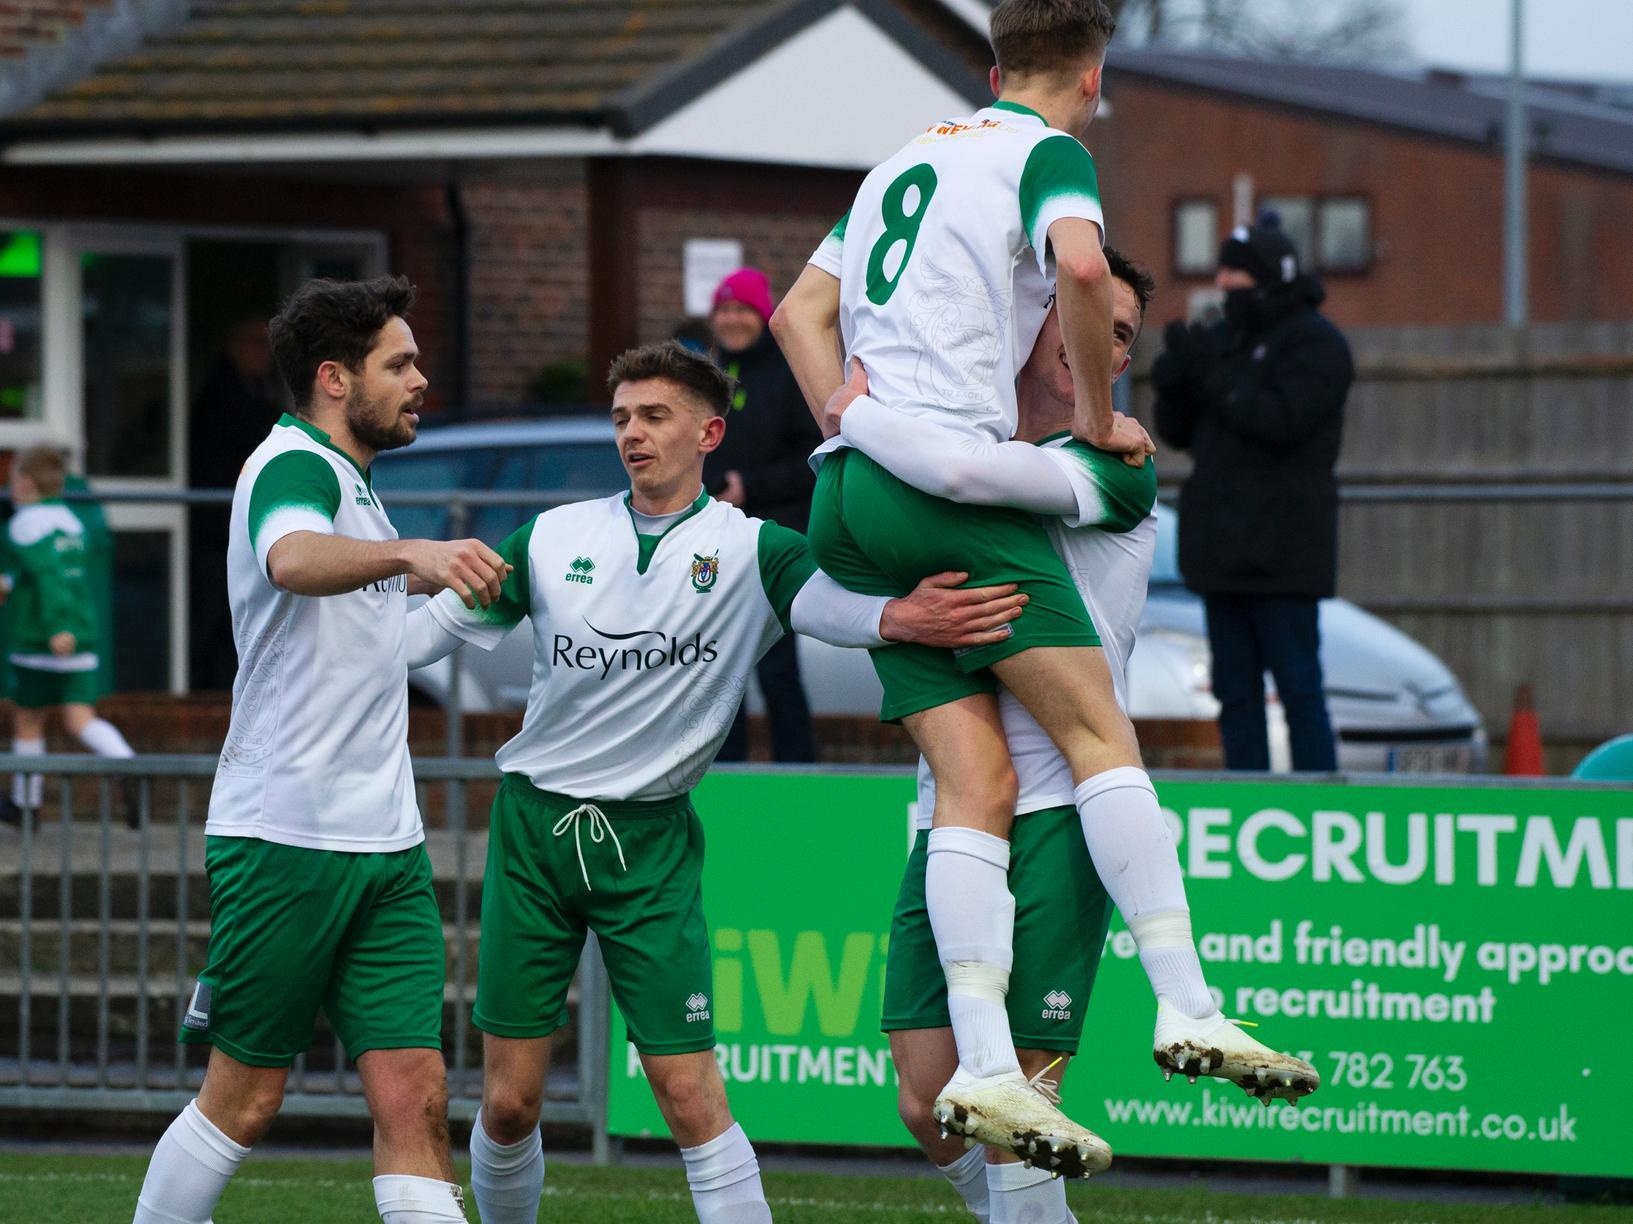 Bognor v Cray - goals and celebrations / Pictures: Tommy McMillan